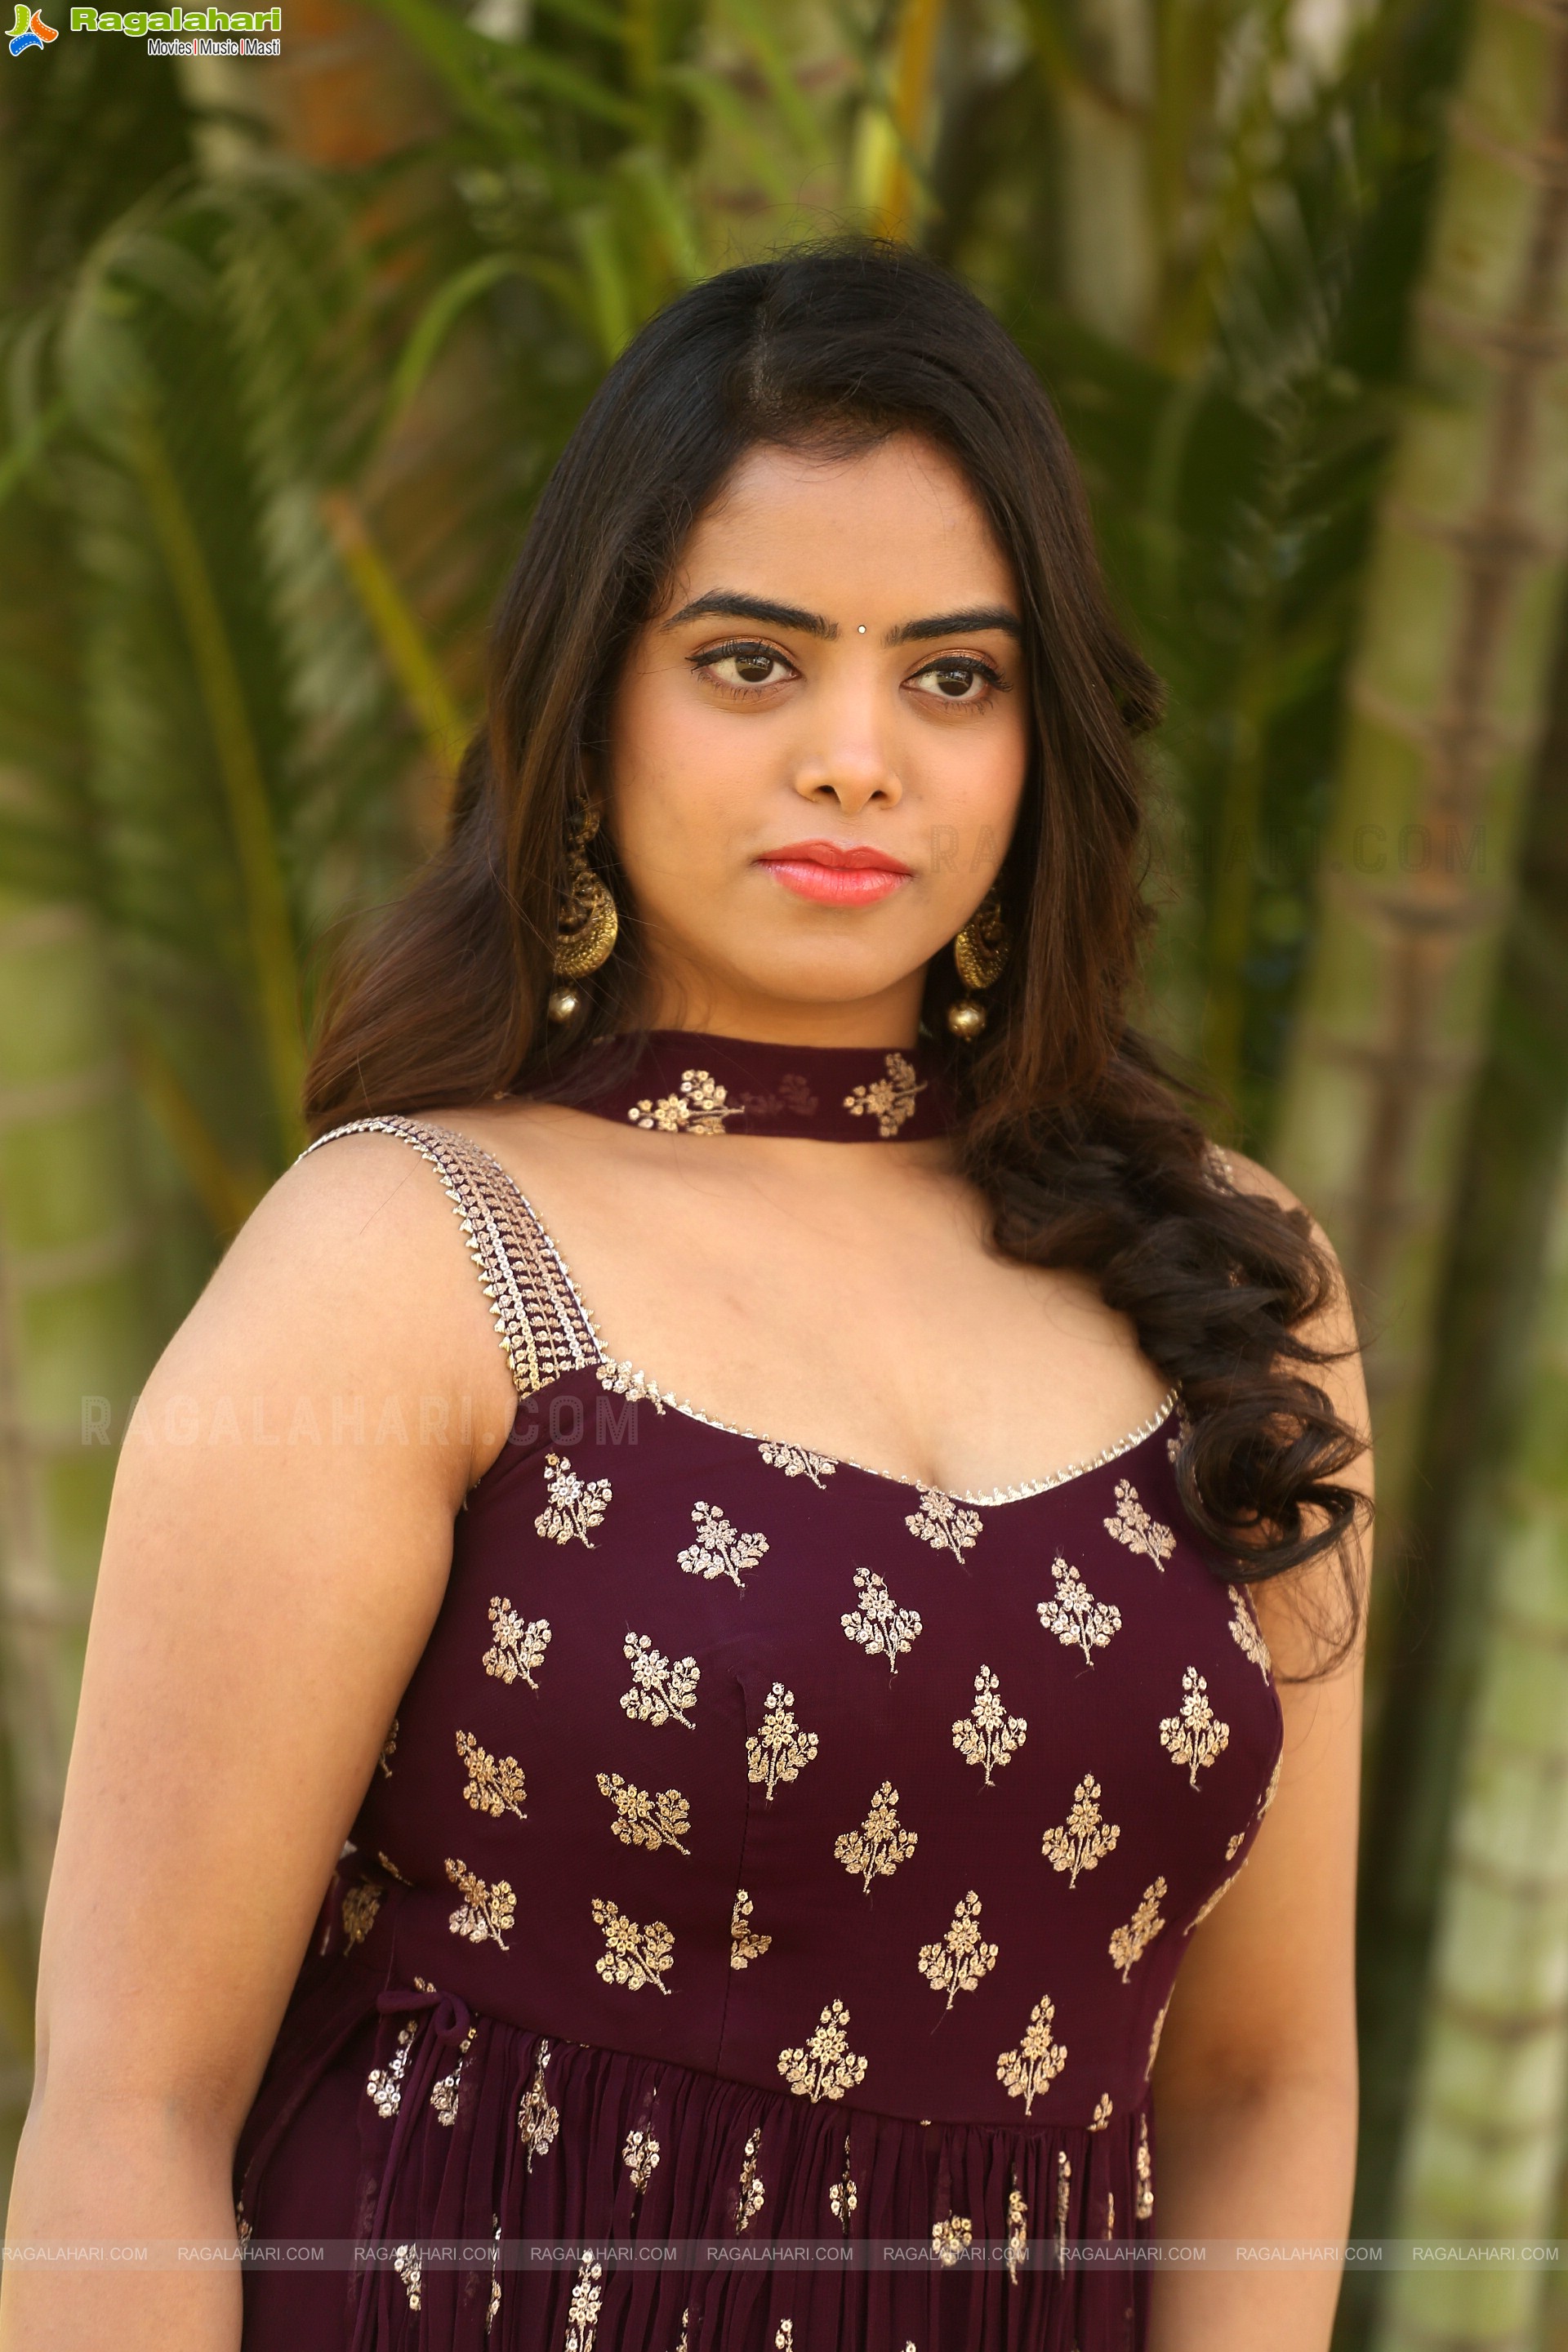 Manjeera Reddy at Chiclets Movie Trailer Launch, HD Photo Gallery